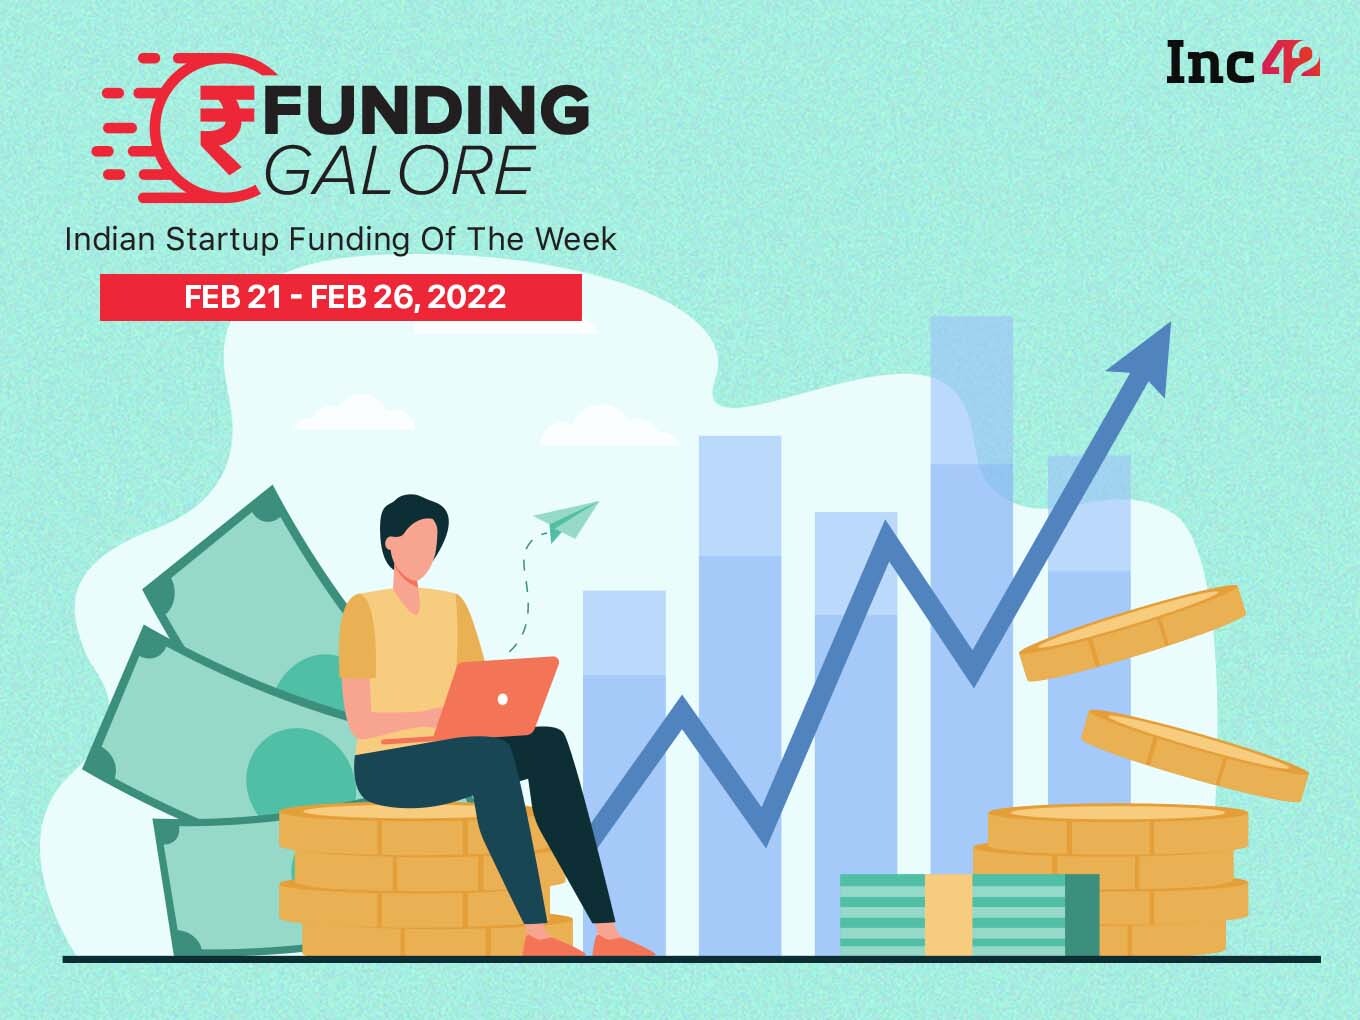 [Funding Galore] From Medibuddy To Perfios— Over $699 Mn Raised By Indian Startups This Week